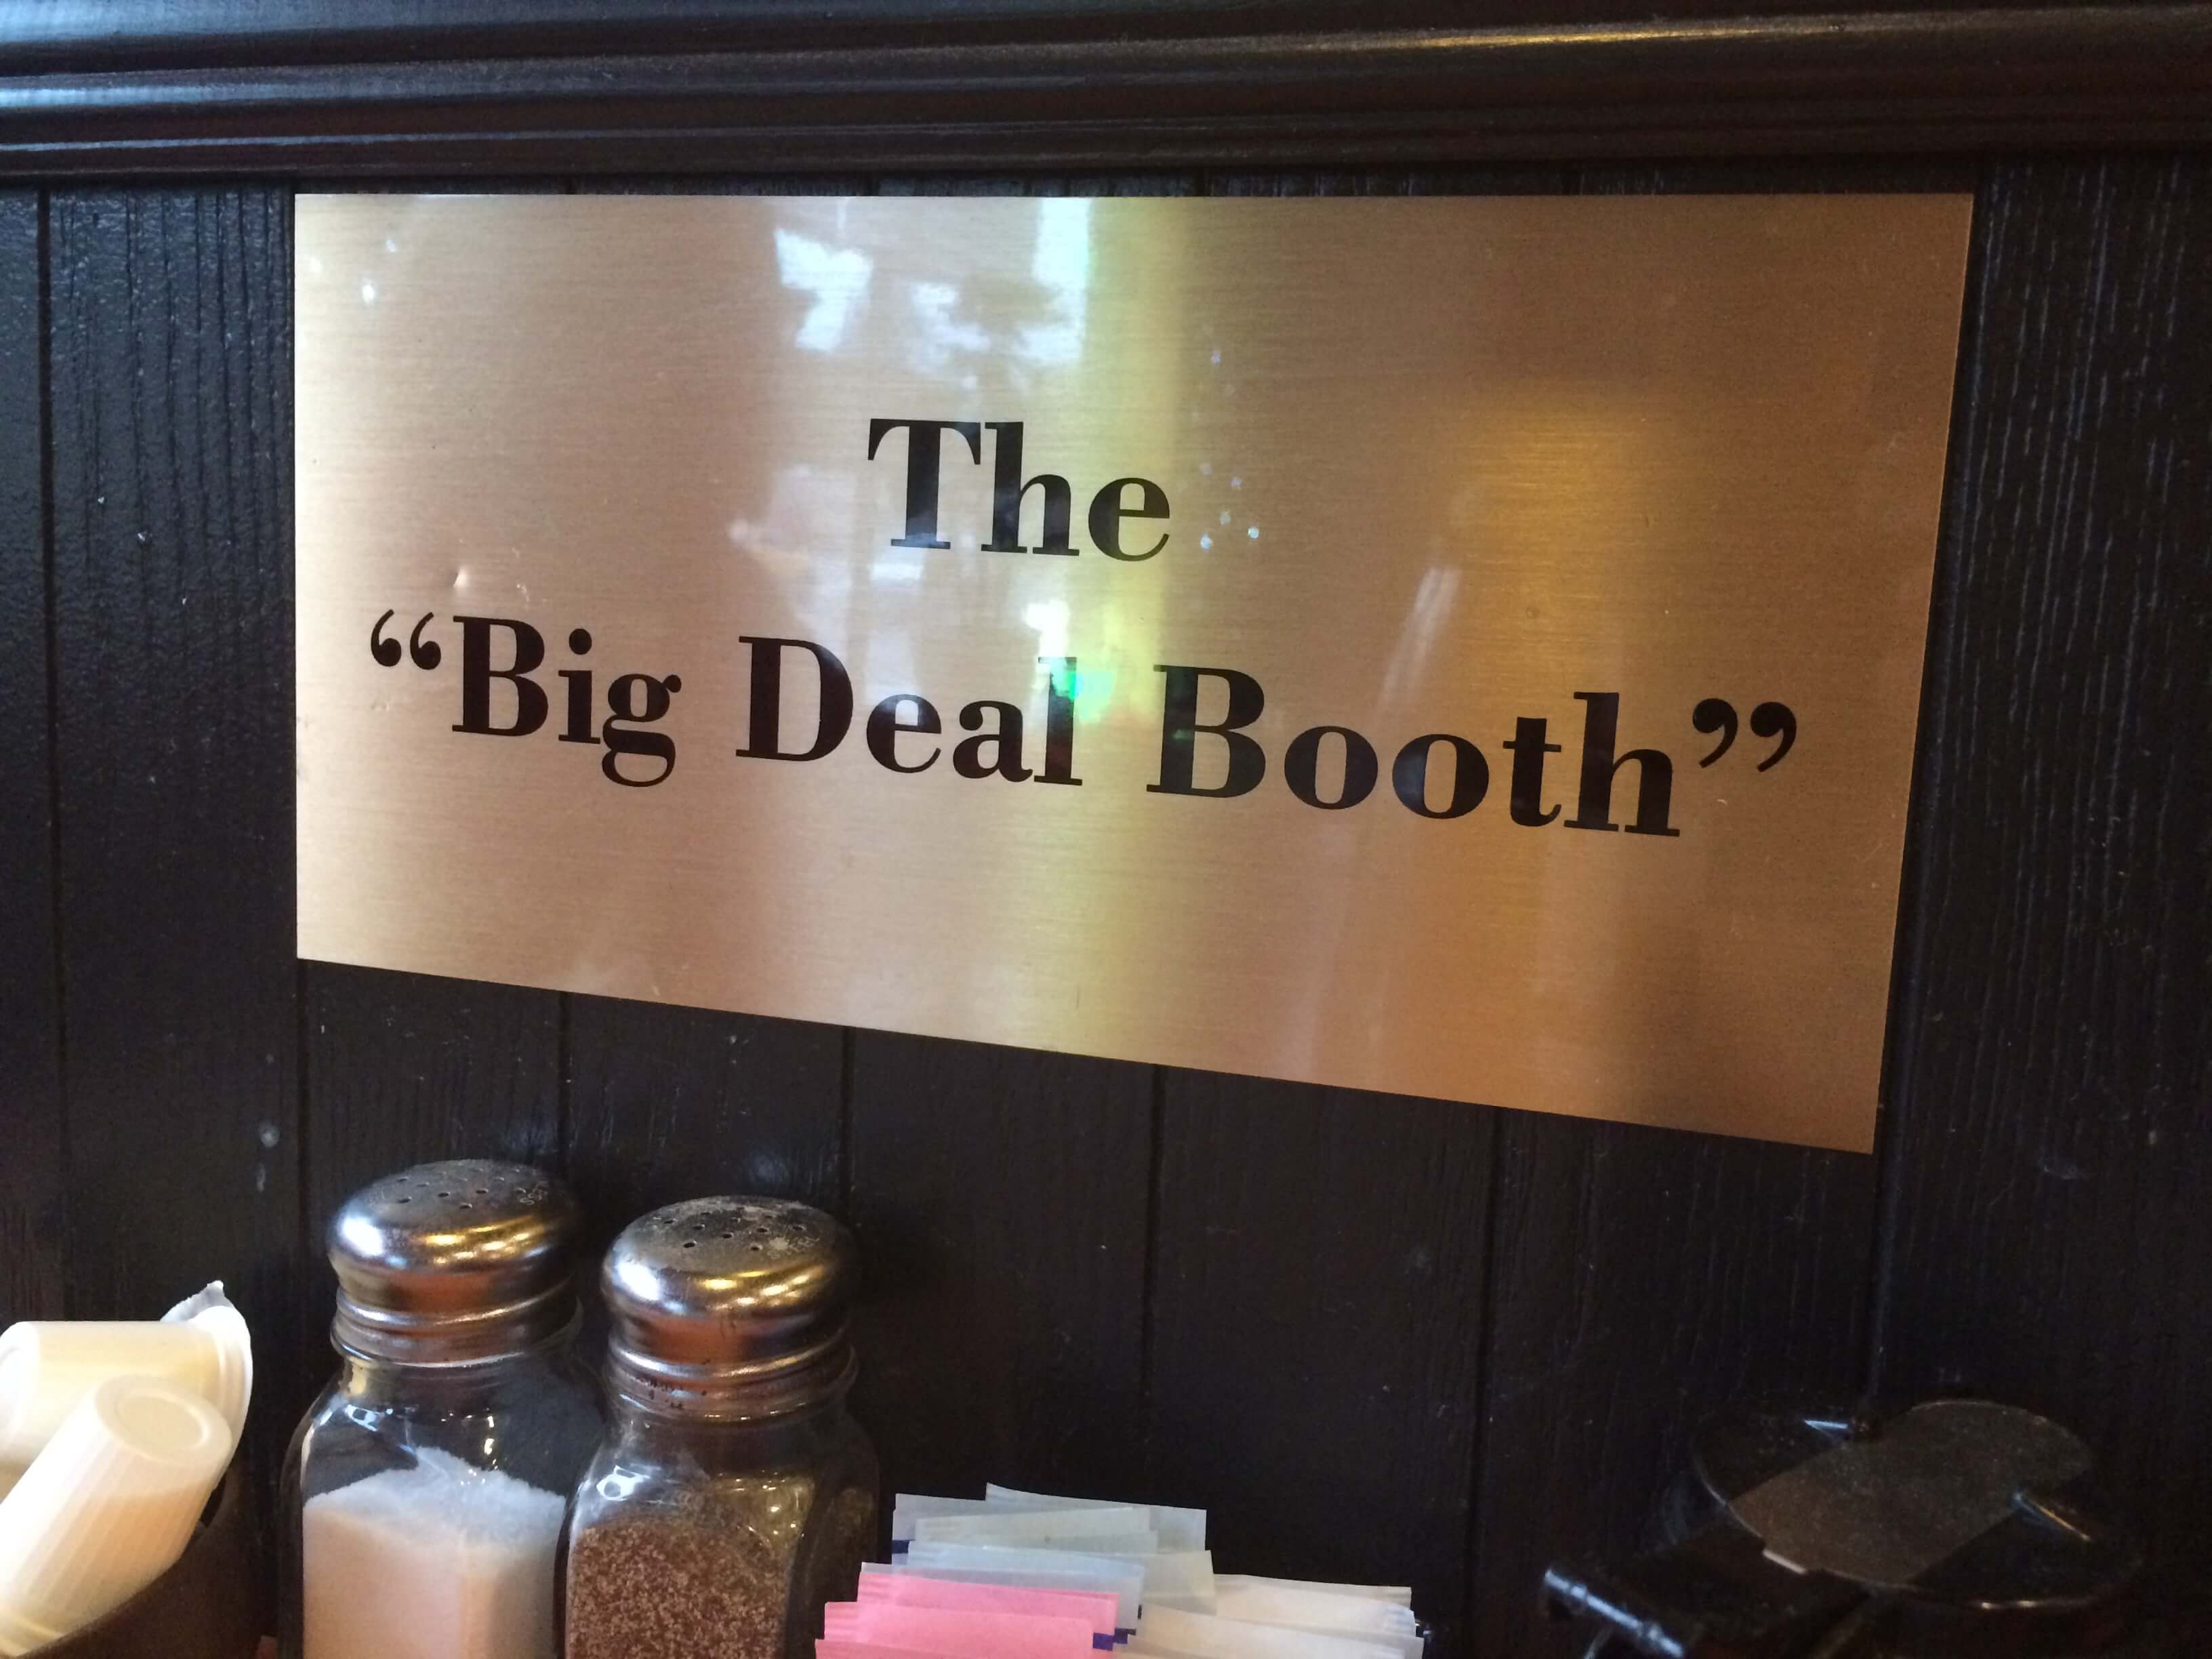 The "Big Deal Booth" sign